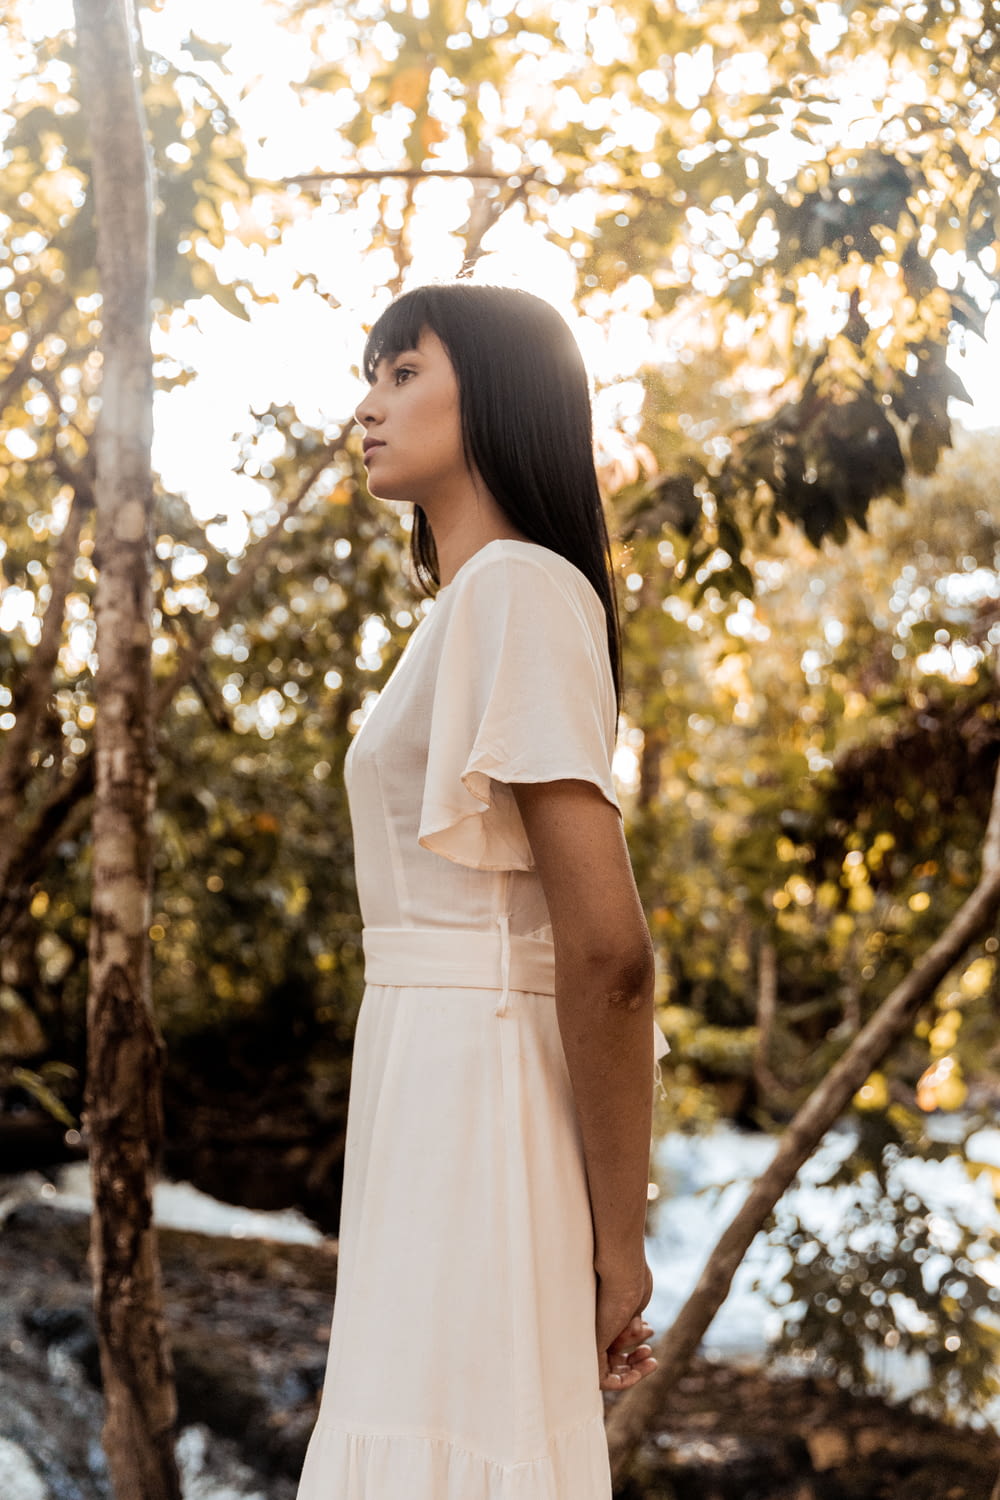 woman in white dress standing near trees during daytime